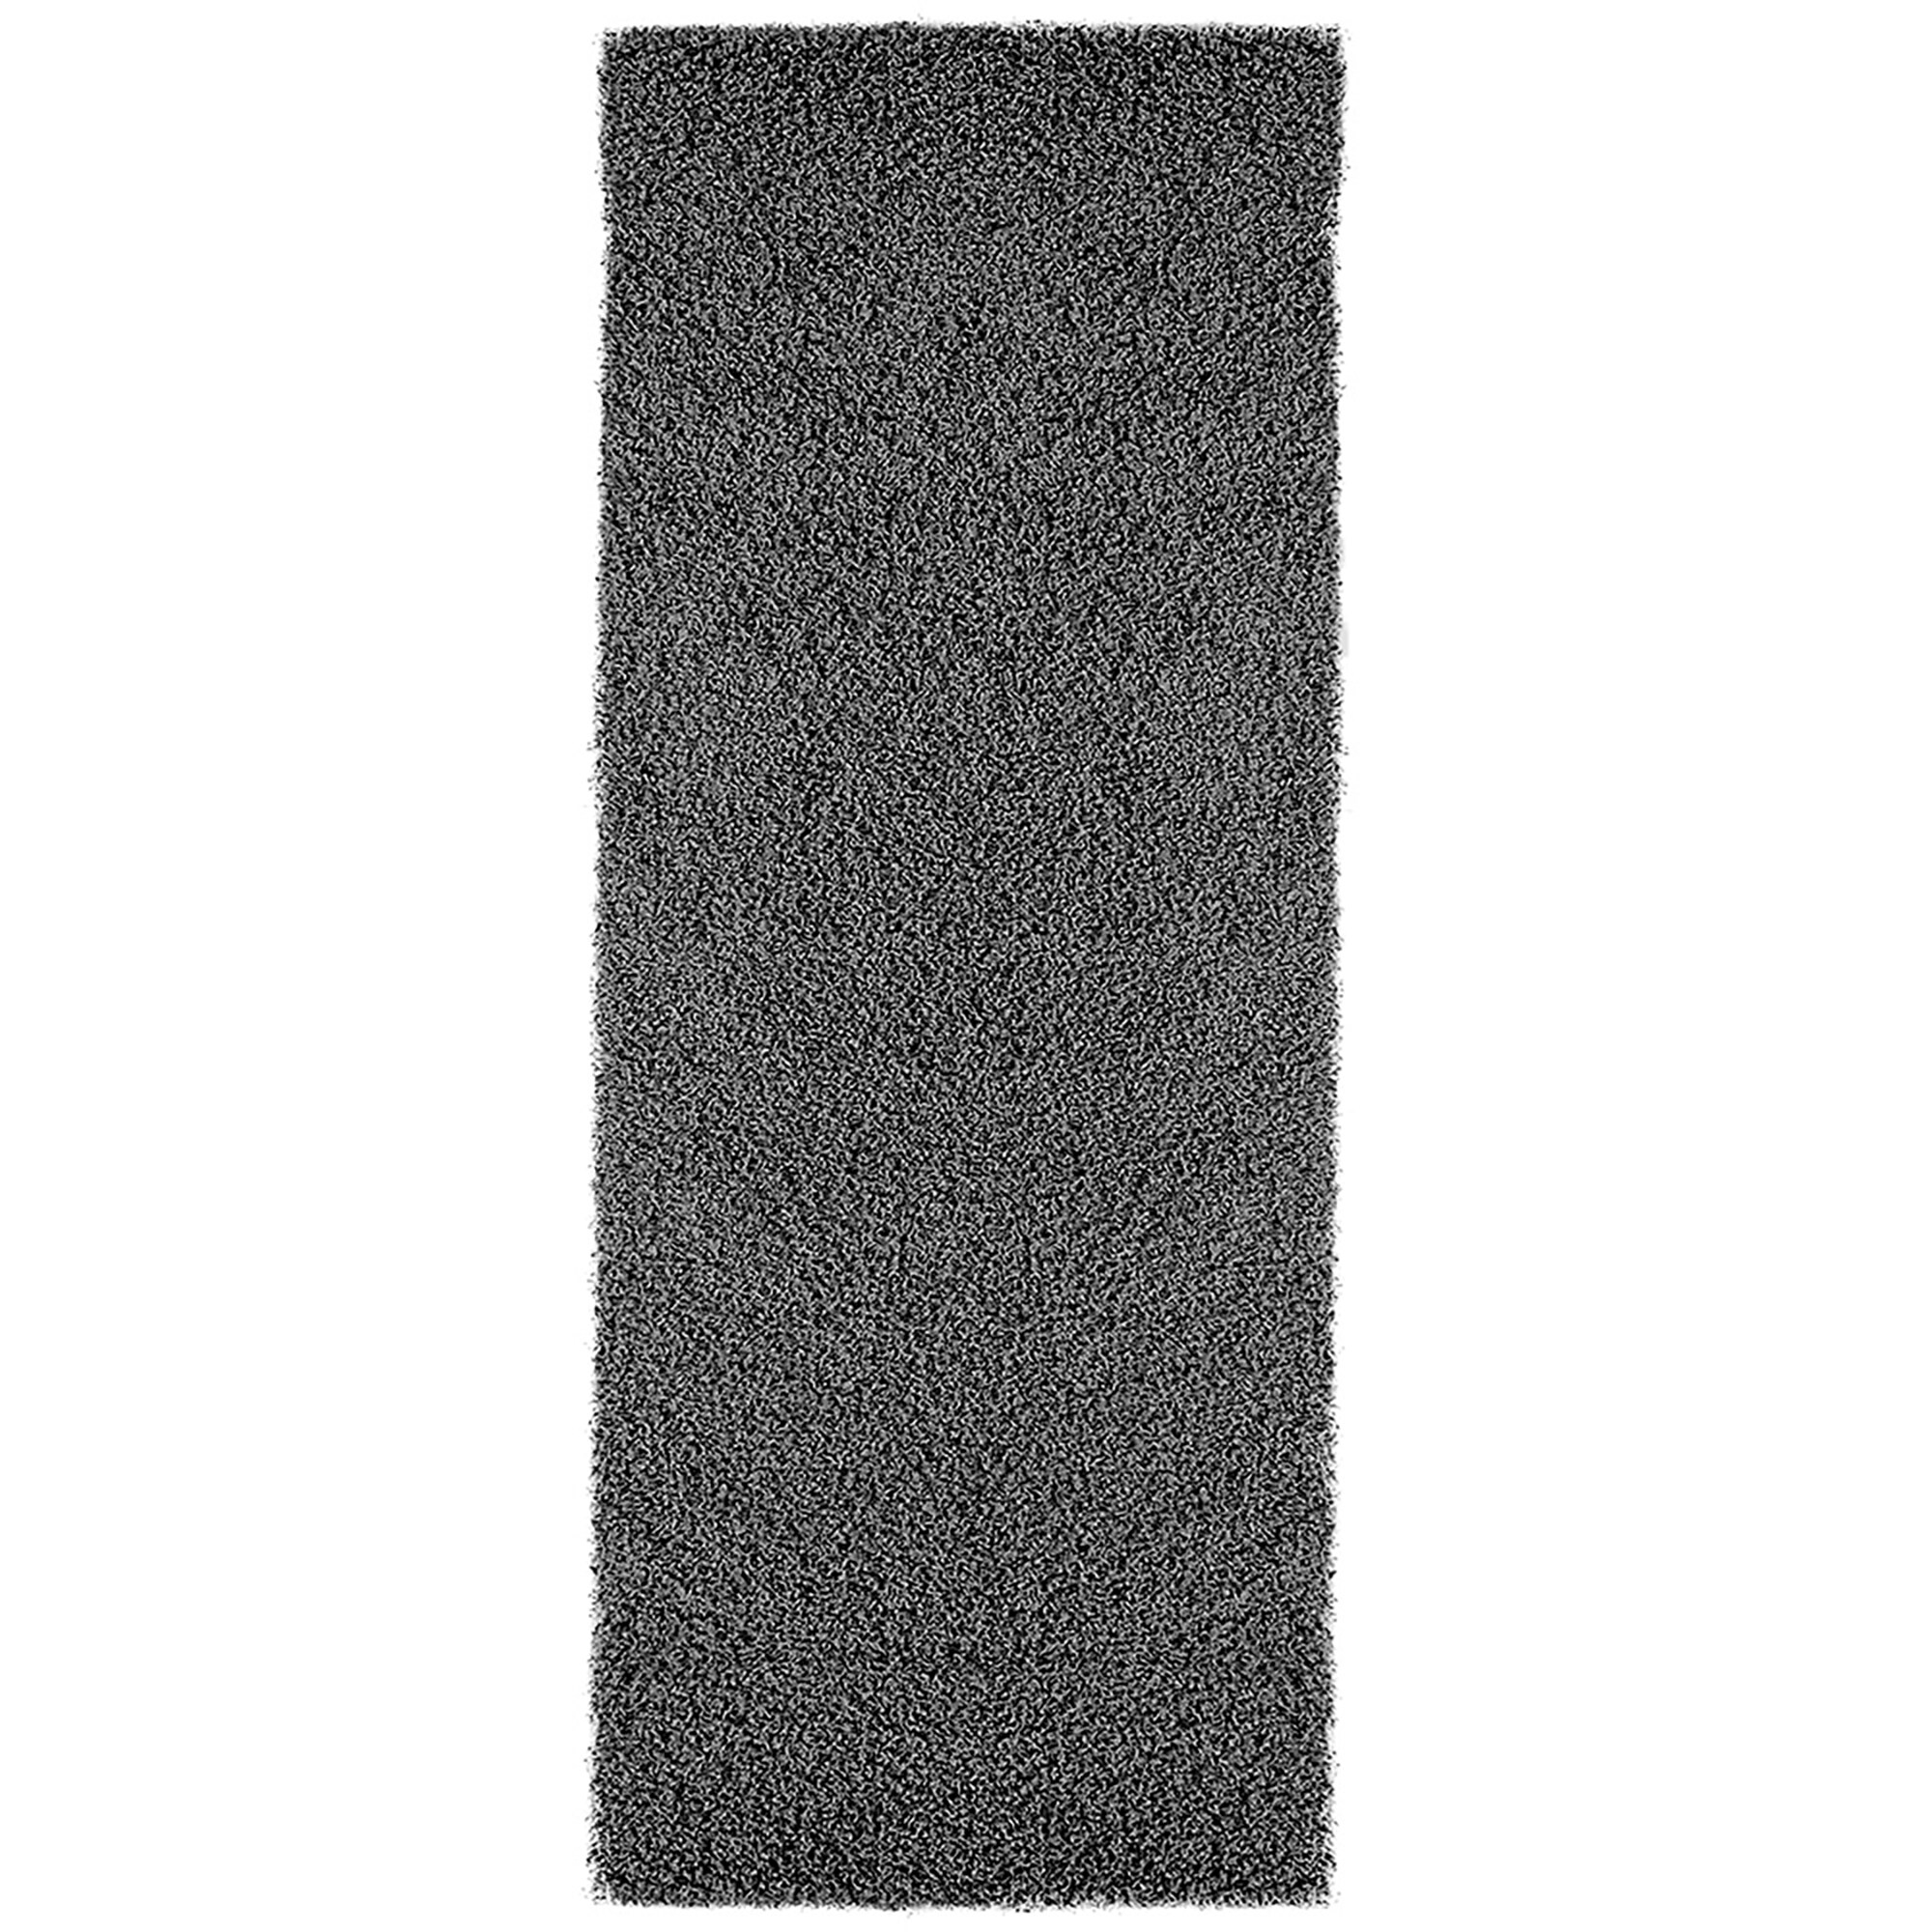 Non Slip Rug Pad Grippers - 2x6, 1/8 Thick, (Felt + Rubber) Double Layers  Area Carpet Mat Tap, Provides Protection and Cushioning for Hardwood or